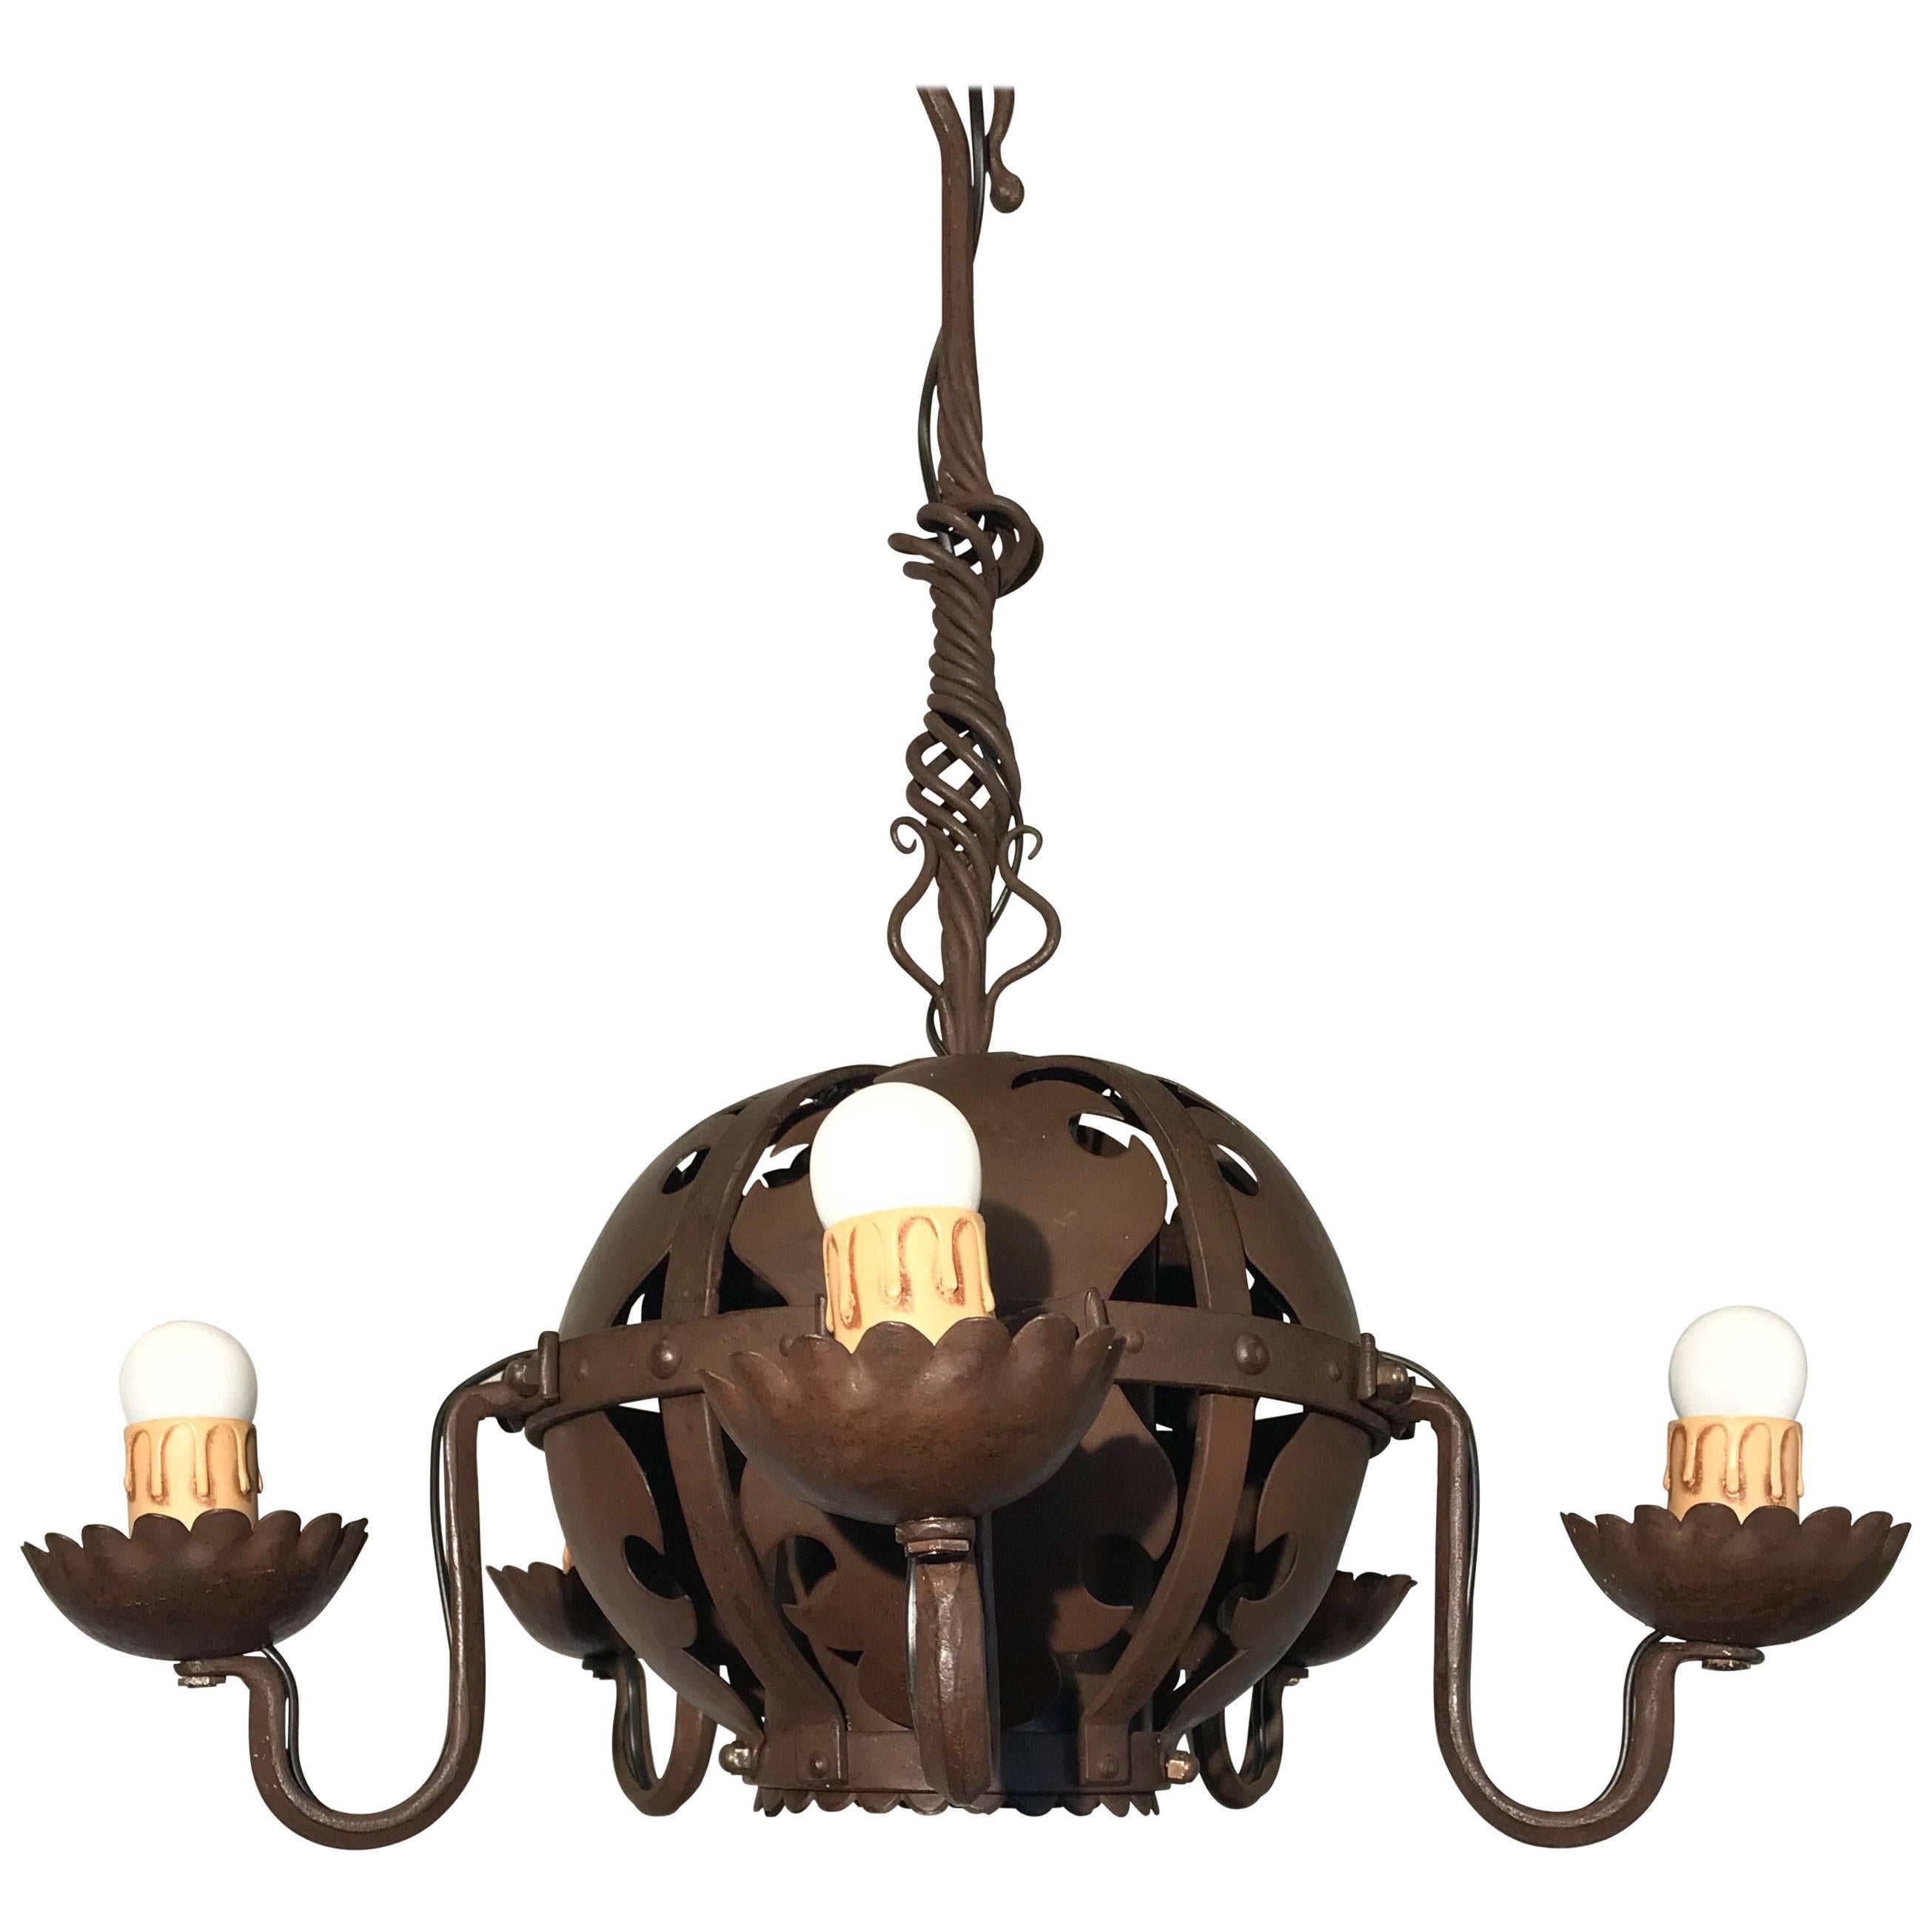 Unique & Hand-Forged Arts & Crafts Wrought Iron Pendant Light, circa 1910 For Sale